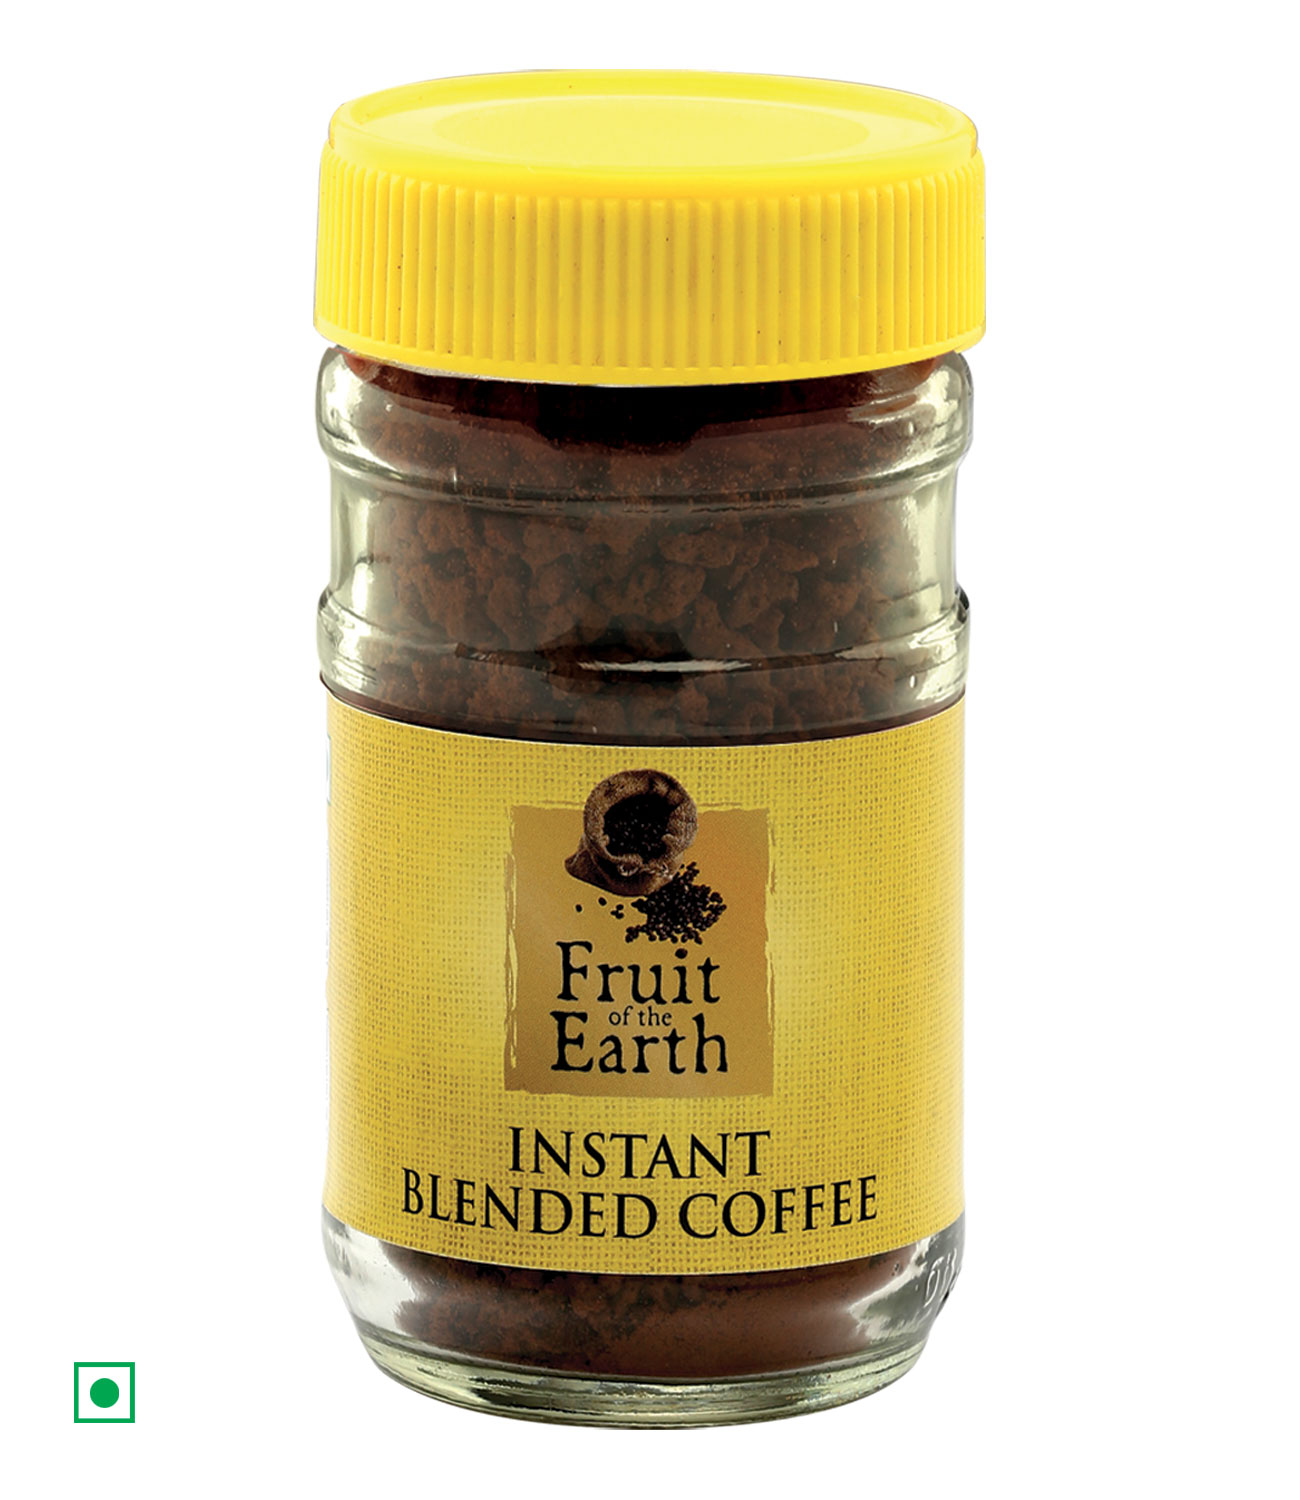 Instant Blended Coffee